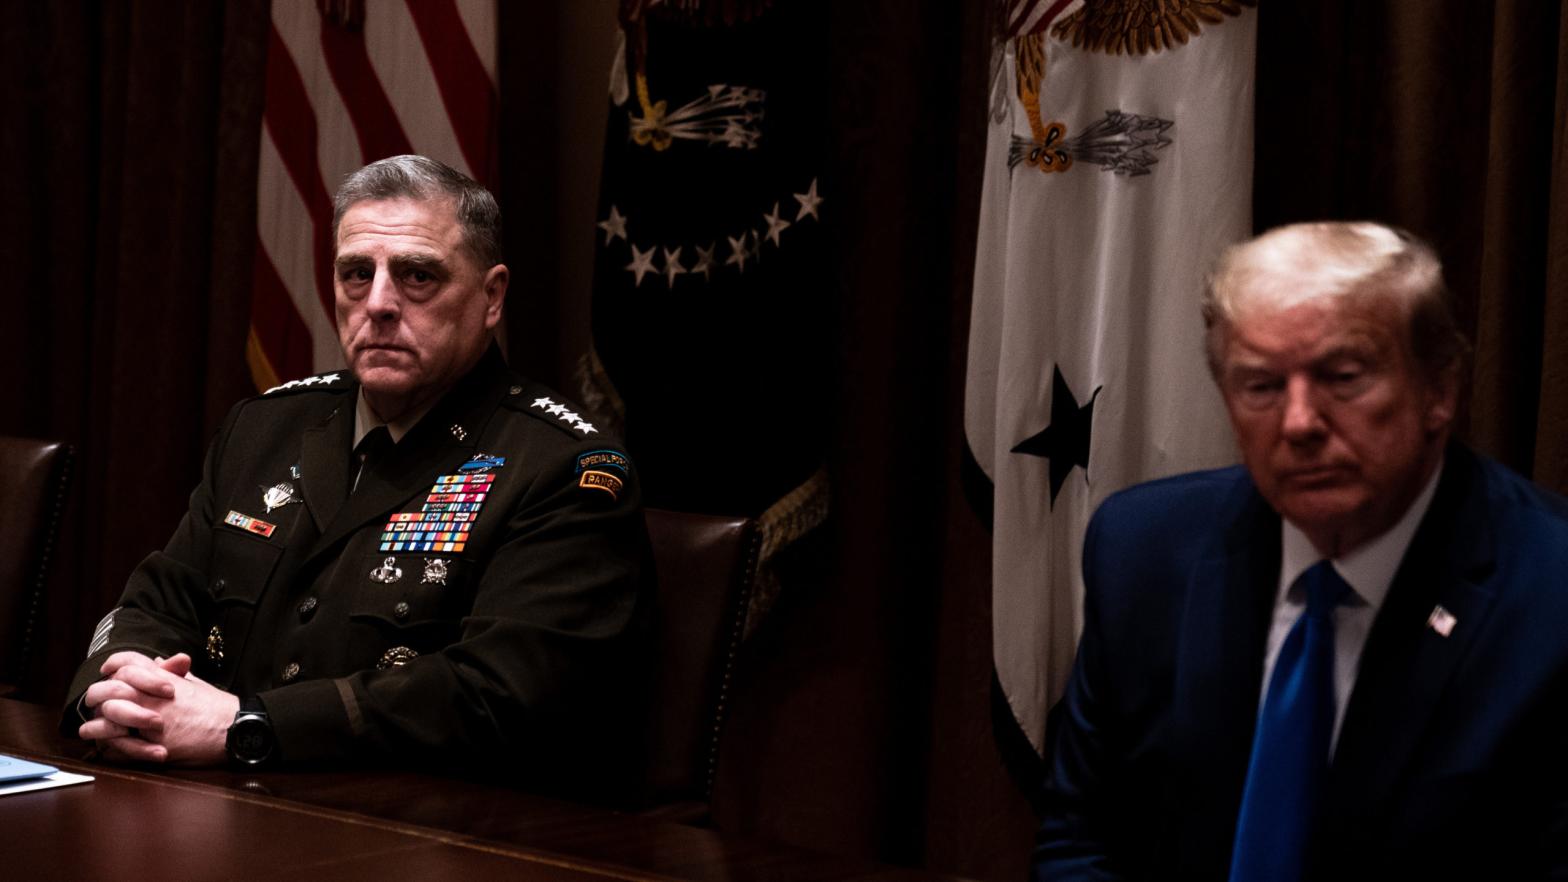 Joint Chiefs of Staff Chairman Mark Milley in a meeting with Donald Trump on May 9. (Photo: Anna Moneymaker, Getty Images)